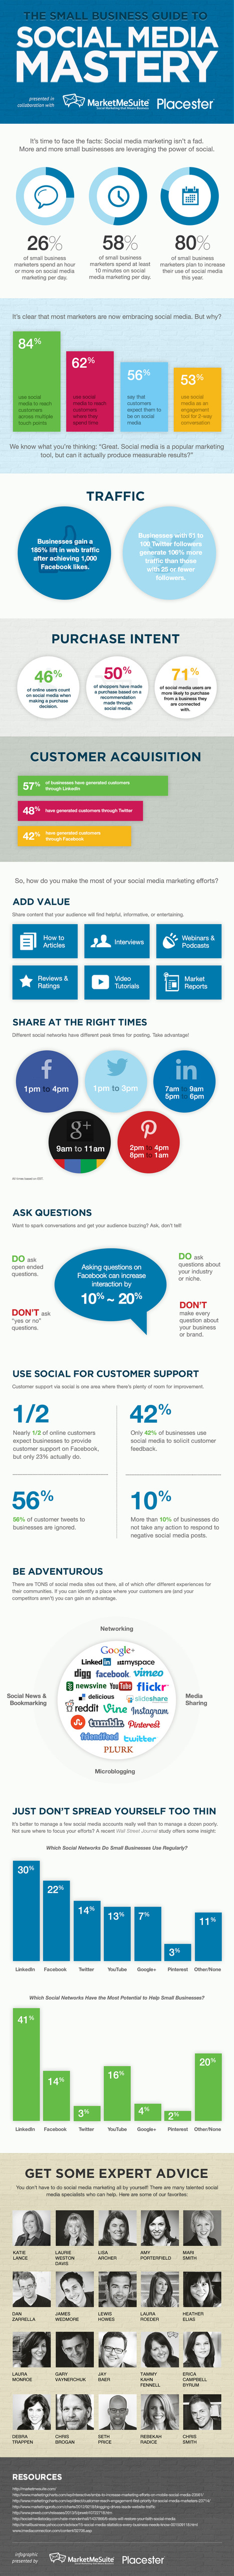 Why social media actually works for small business [infographic] | Daily Magazine | Scoop.it